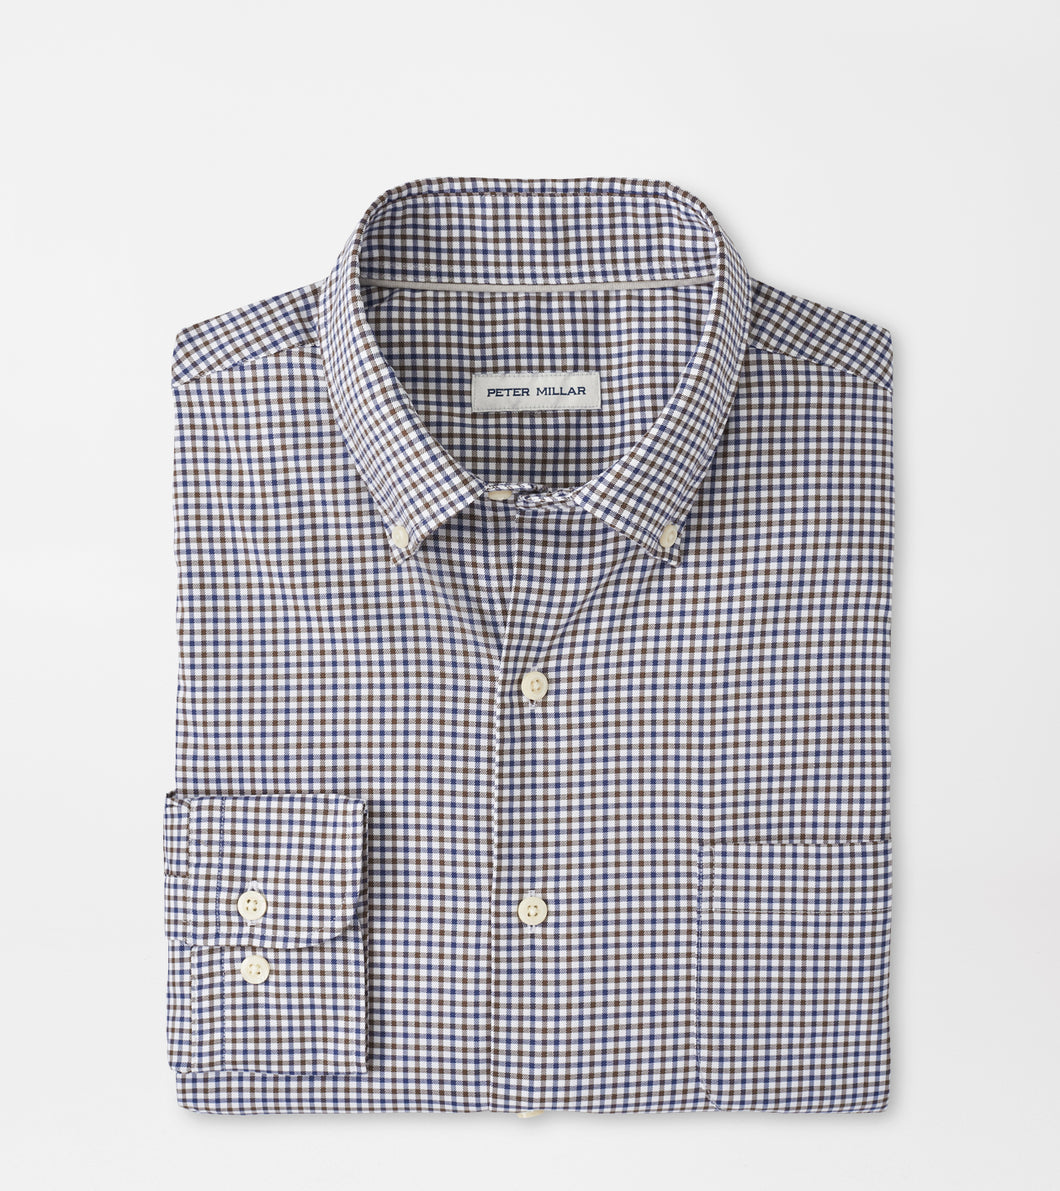 Peter Millar Selby Cotton-Stretch Sport Shirt in Navy